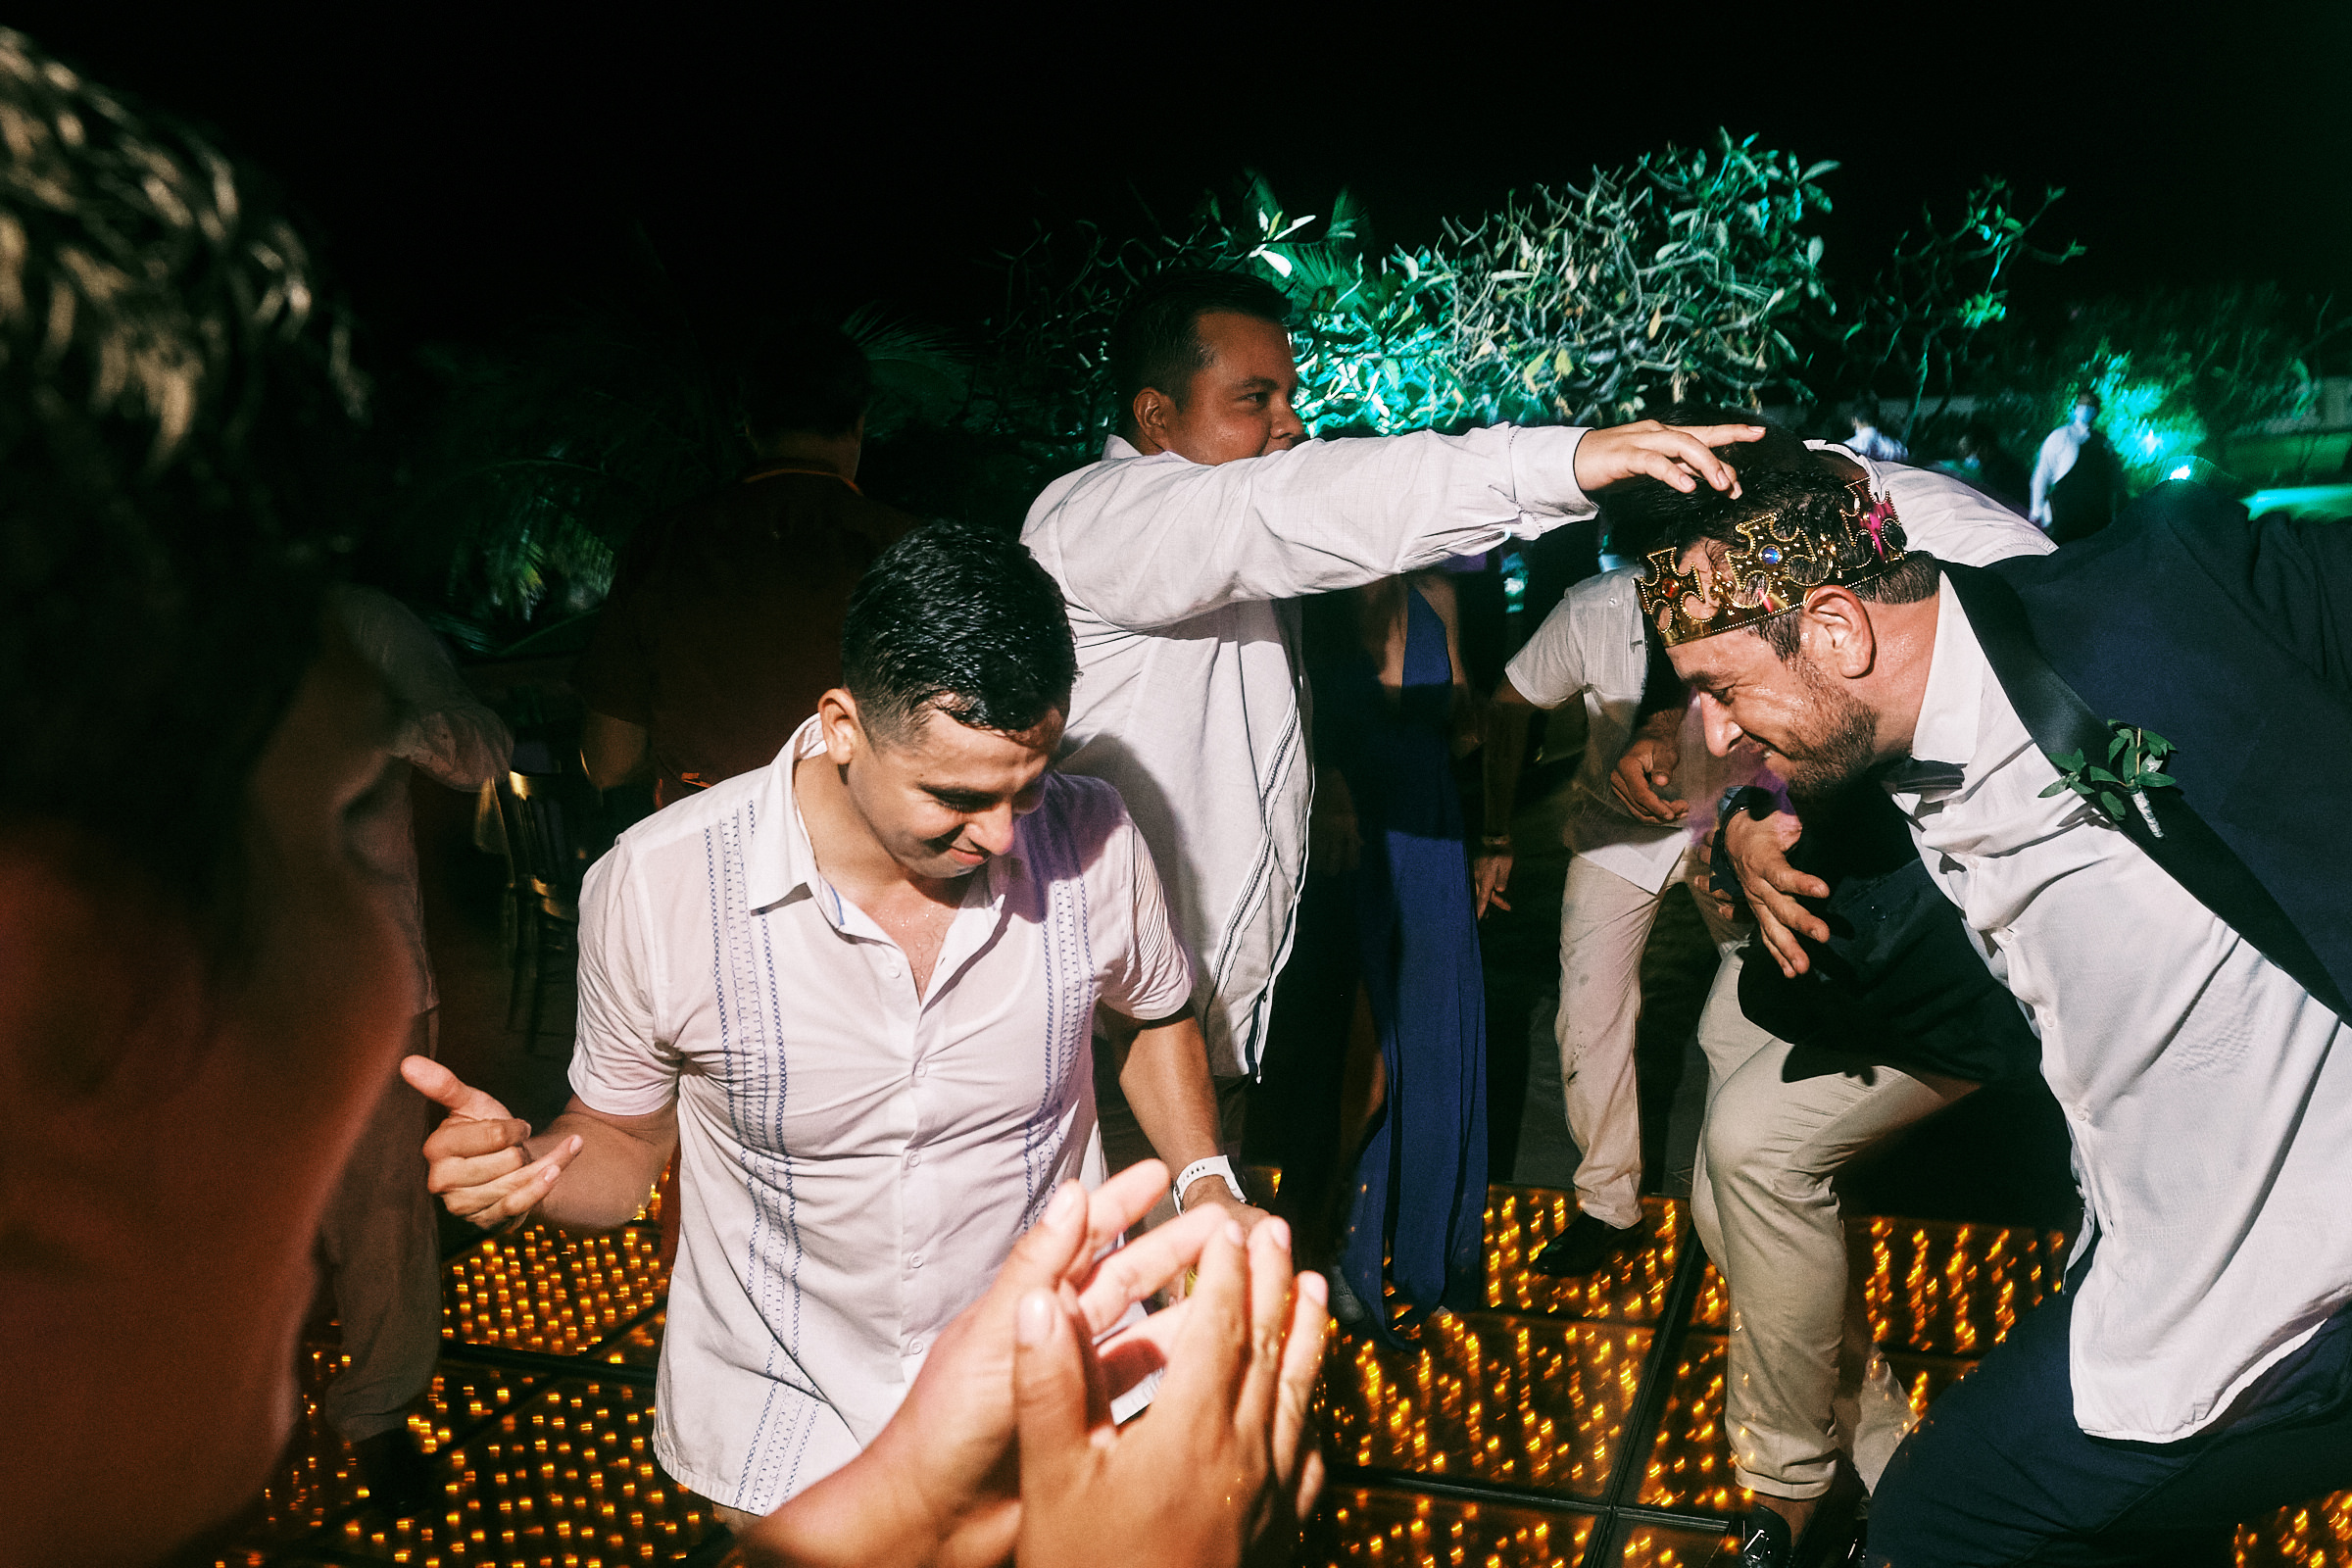 Groom Dances With His Friend While Wearing A Crown